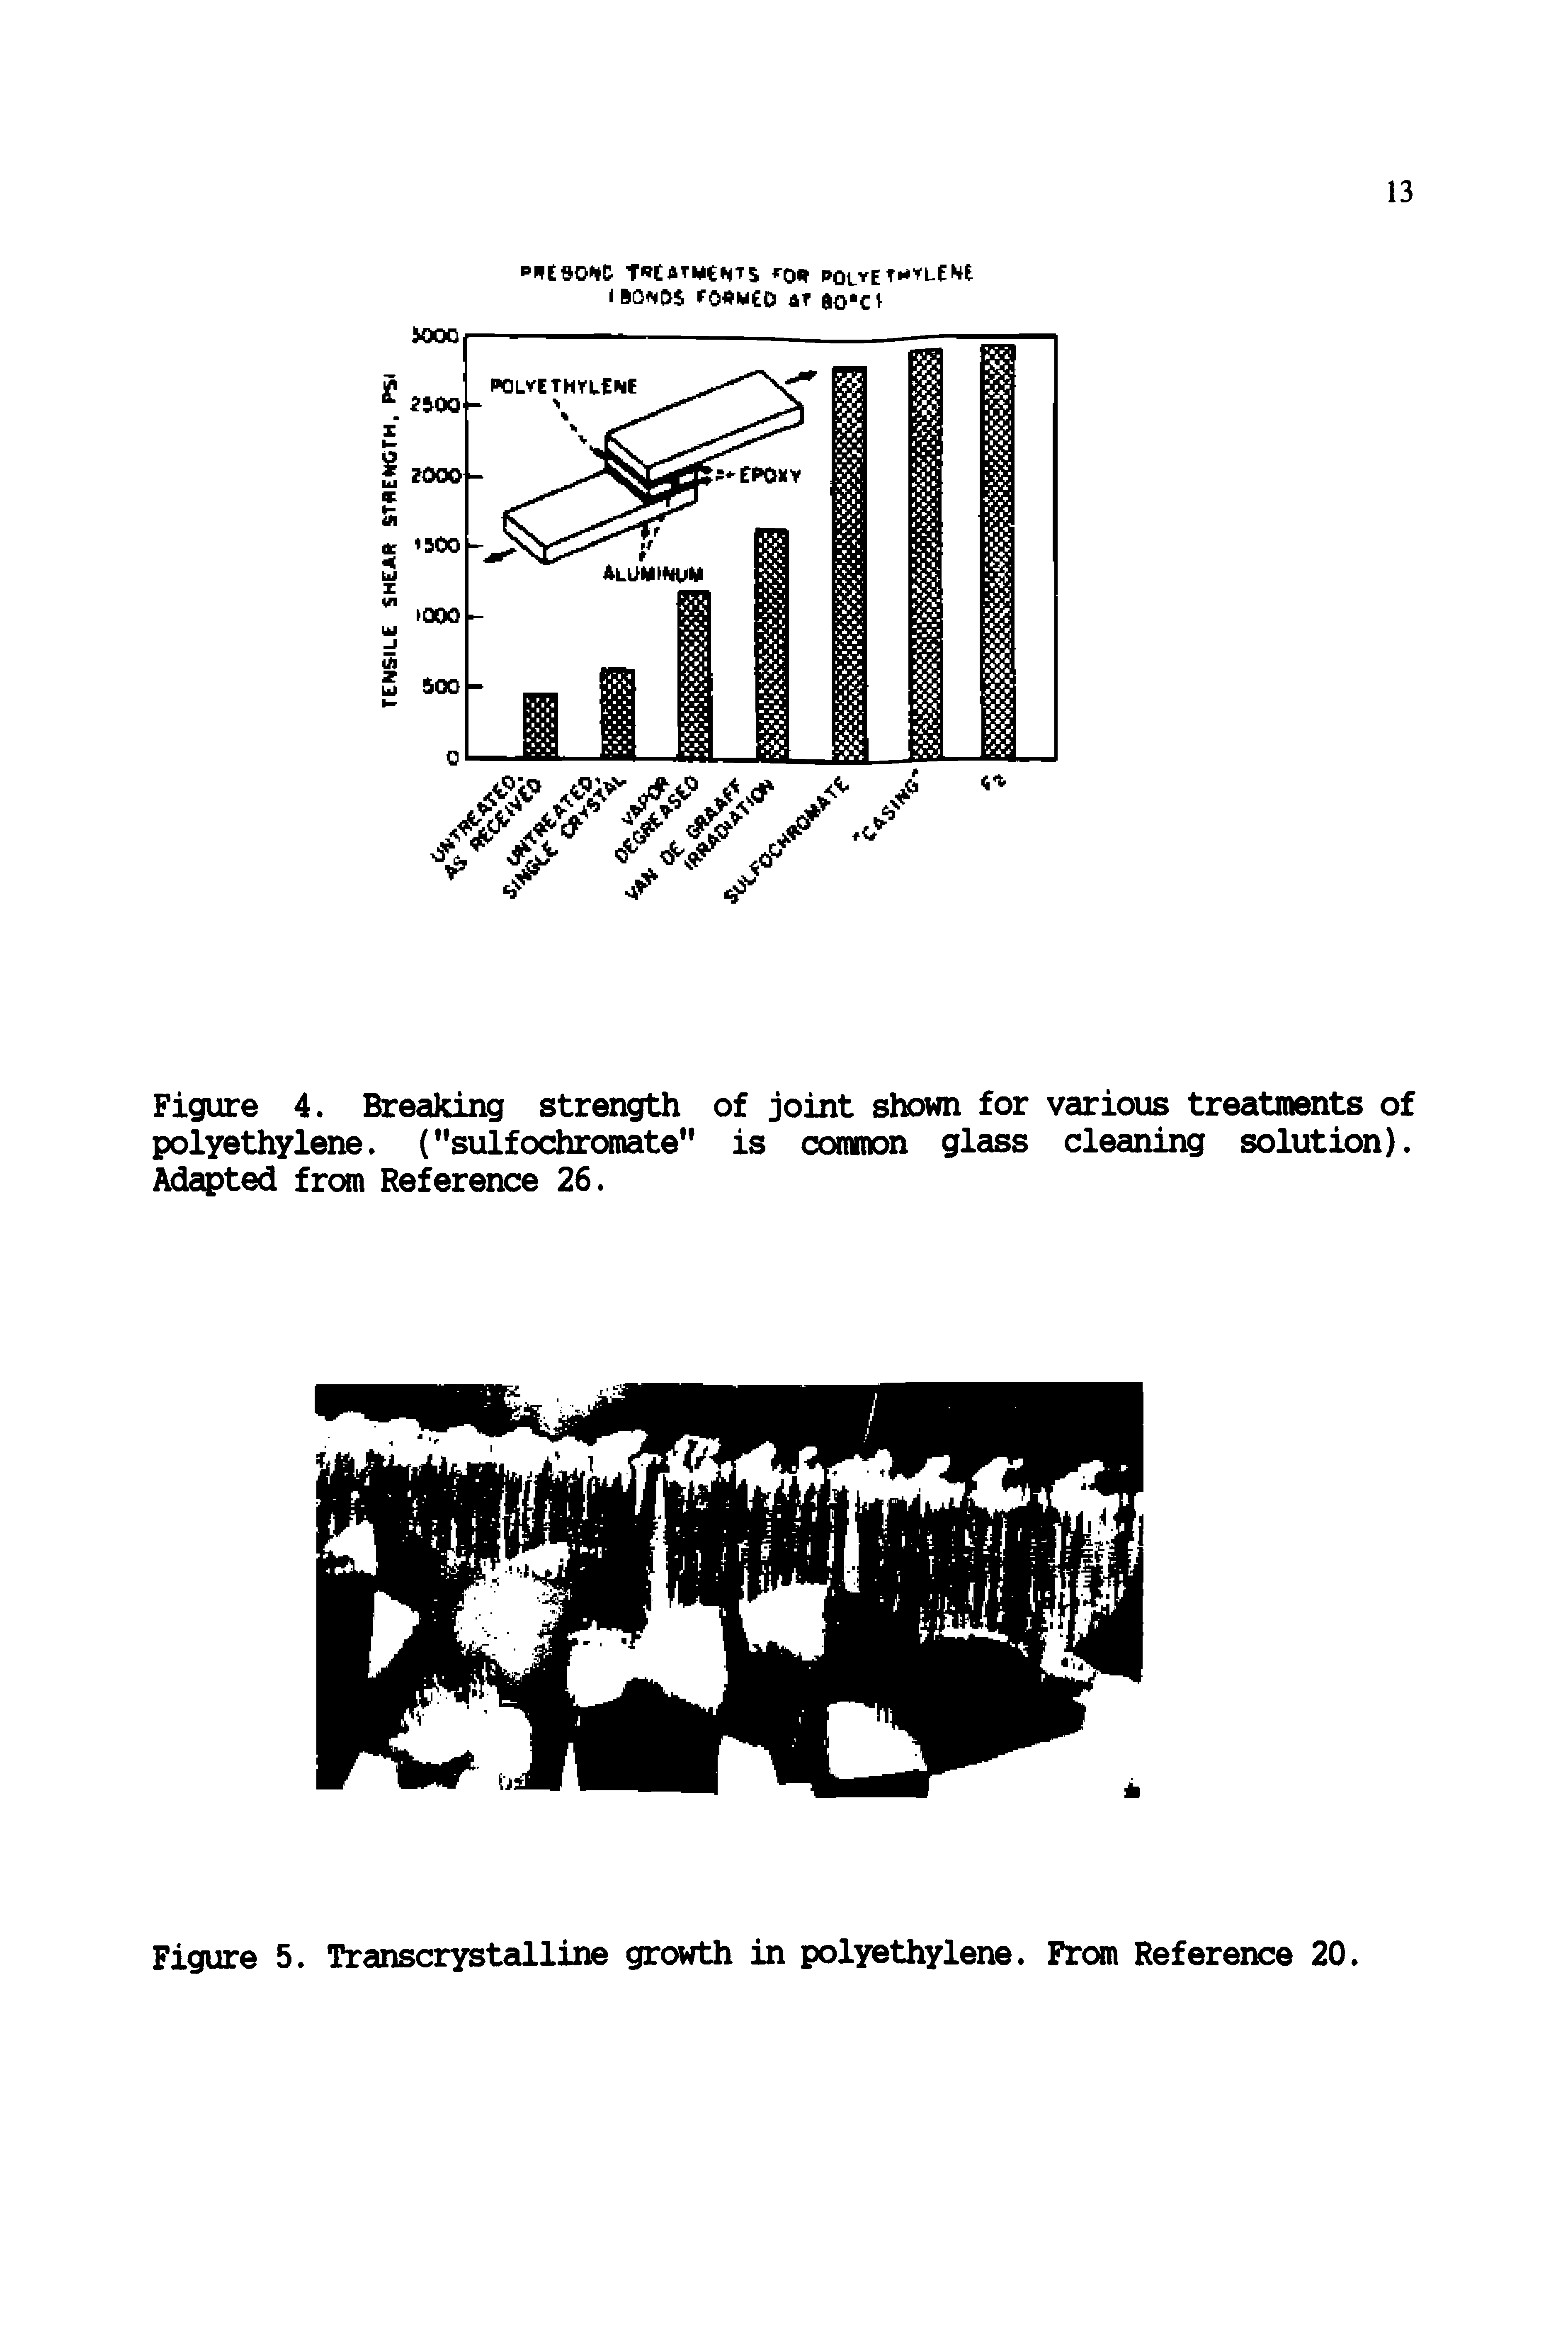 Figure 5. Transcrystalline growth in polyethylene. From Reference 20.